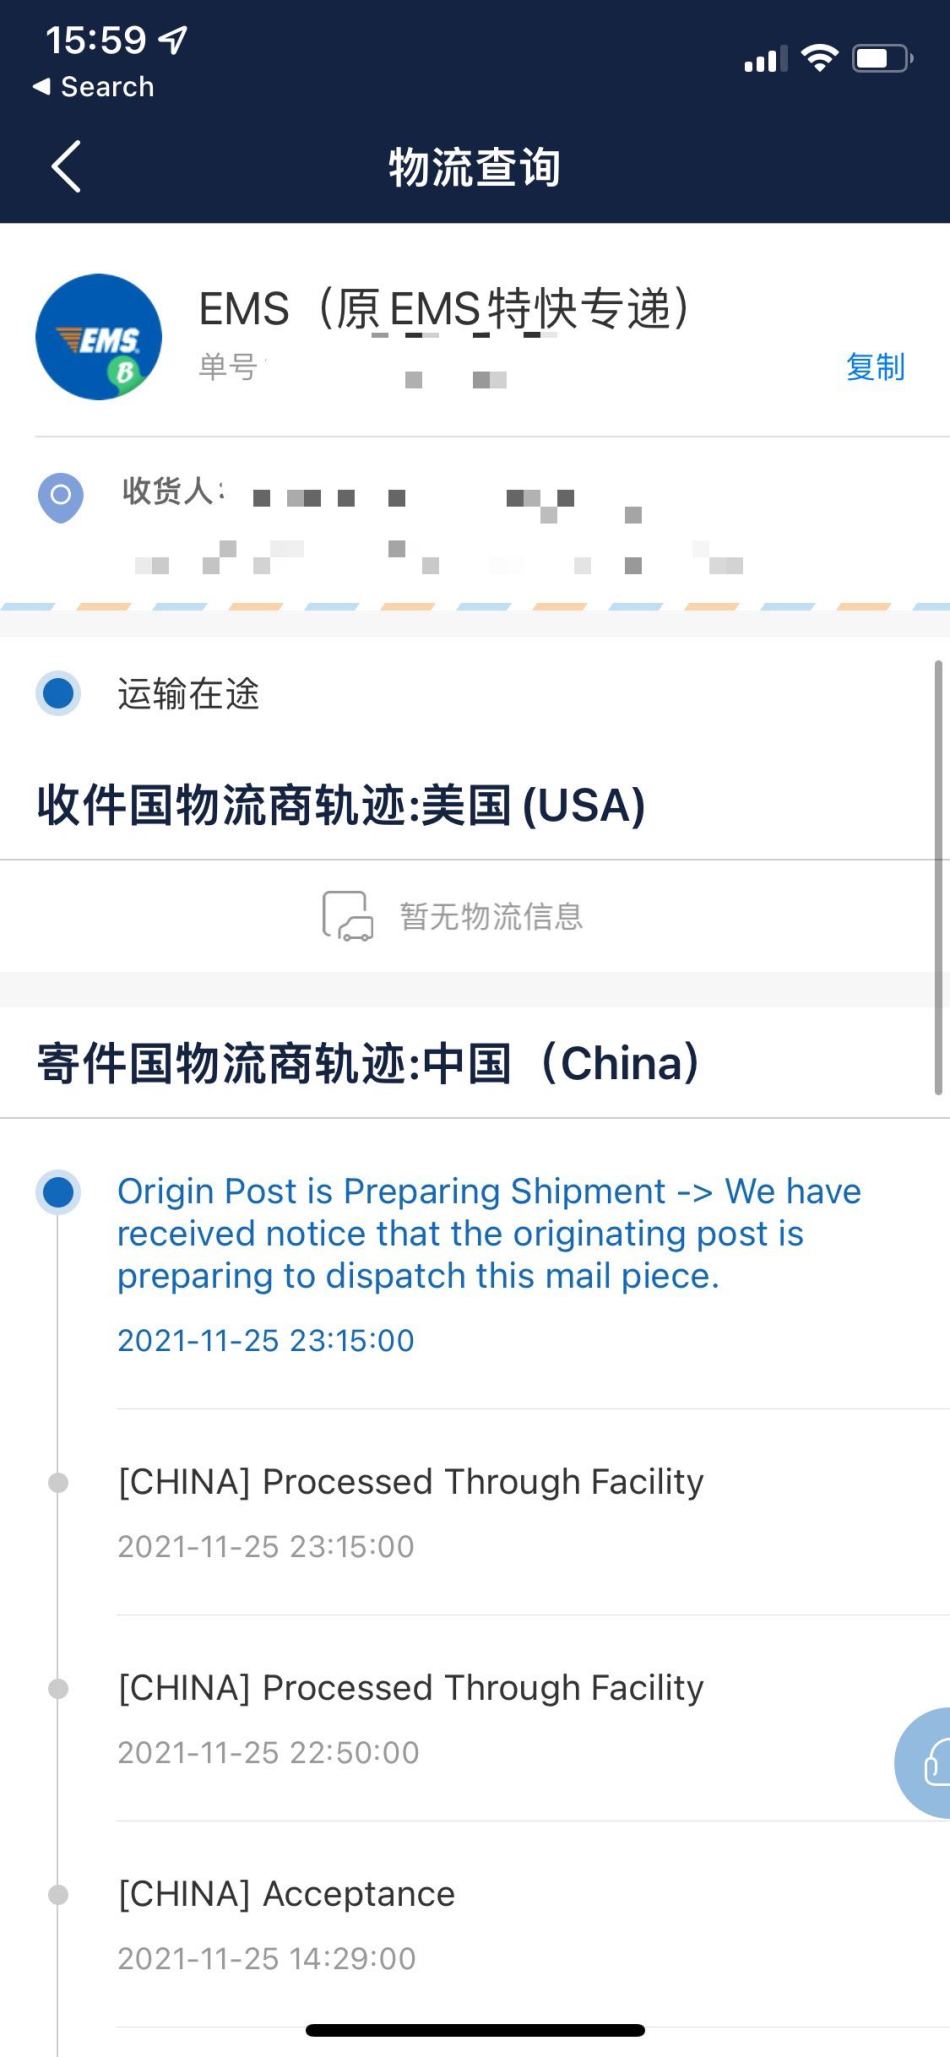 https://img1.superbuy.com/images/consult/2022/02/21/d007fb8198390bd1331fc1ad4ccf3091.jpg?x-oss-process=image/resize,w_950